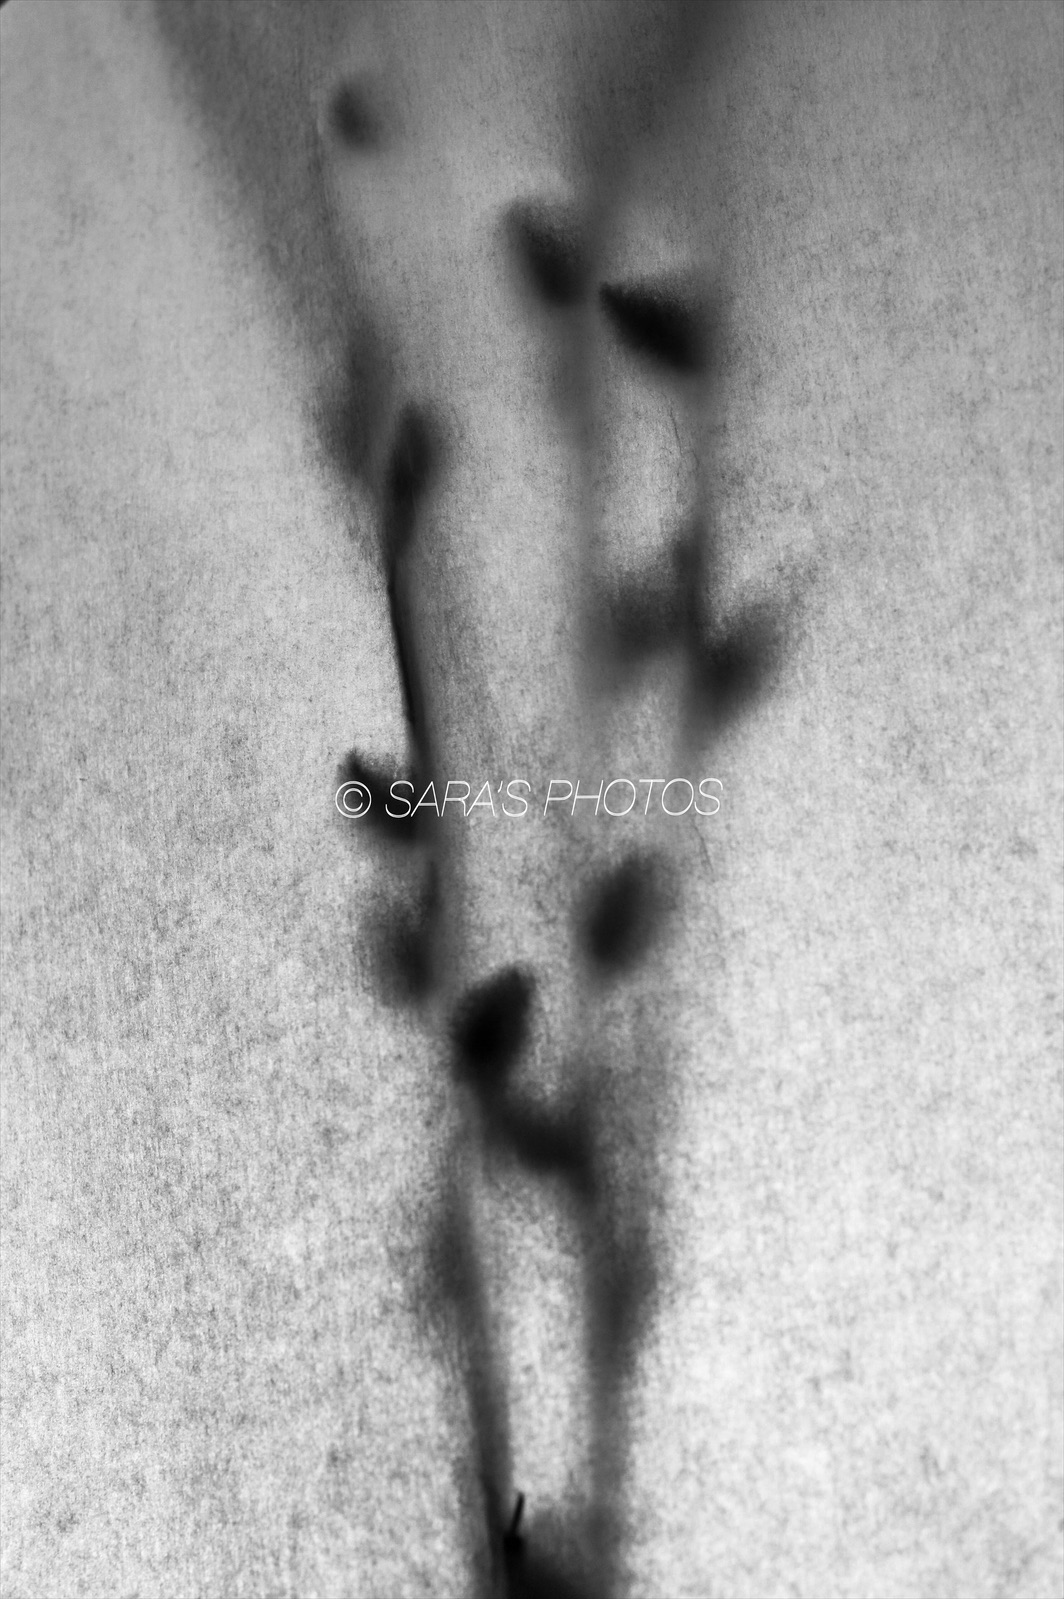 A blurry image of a cat 's paw print.